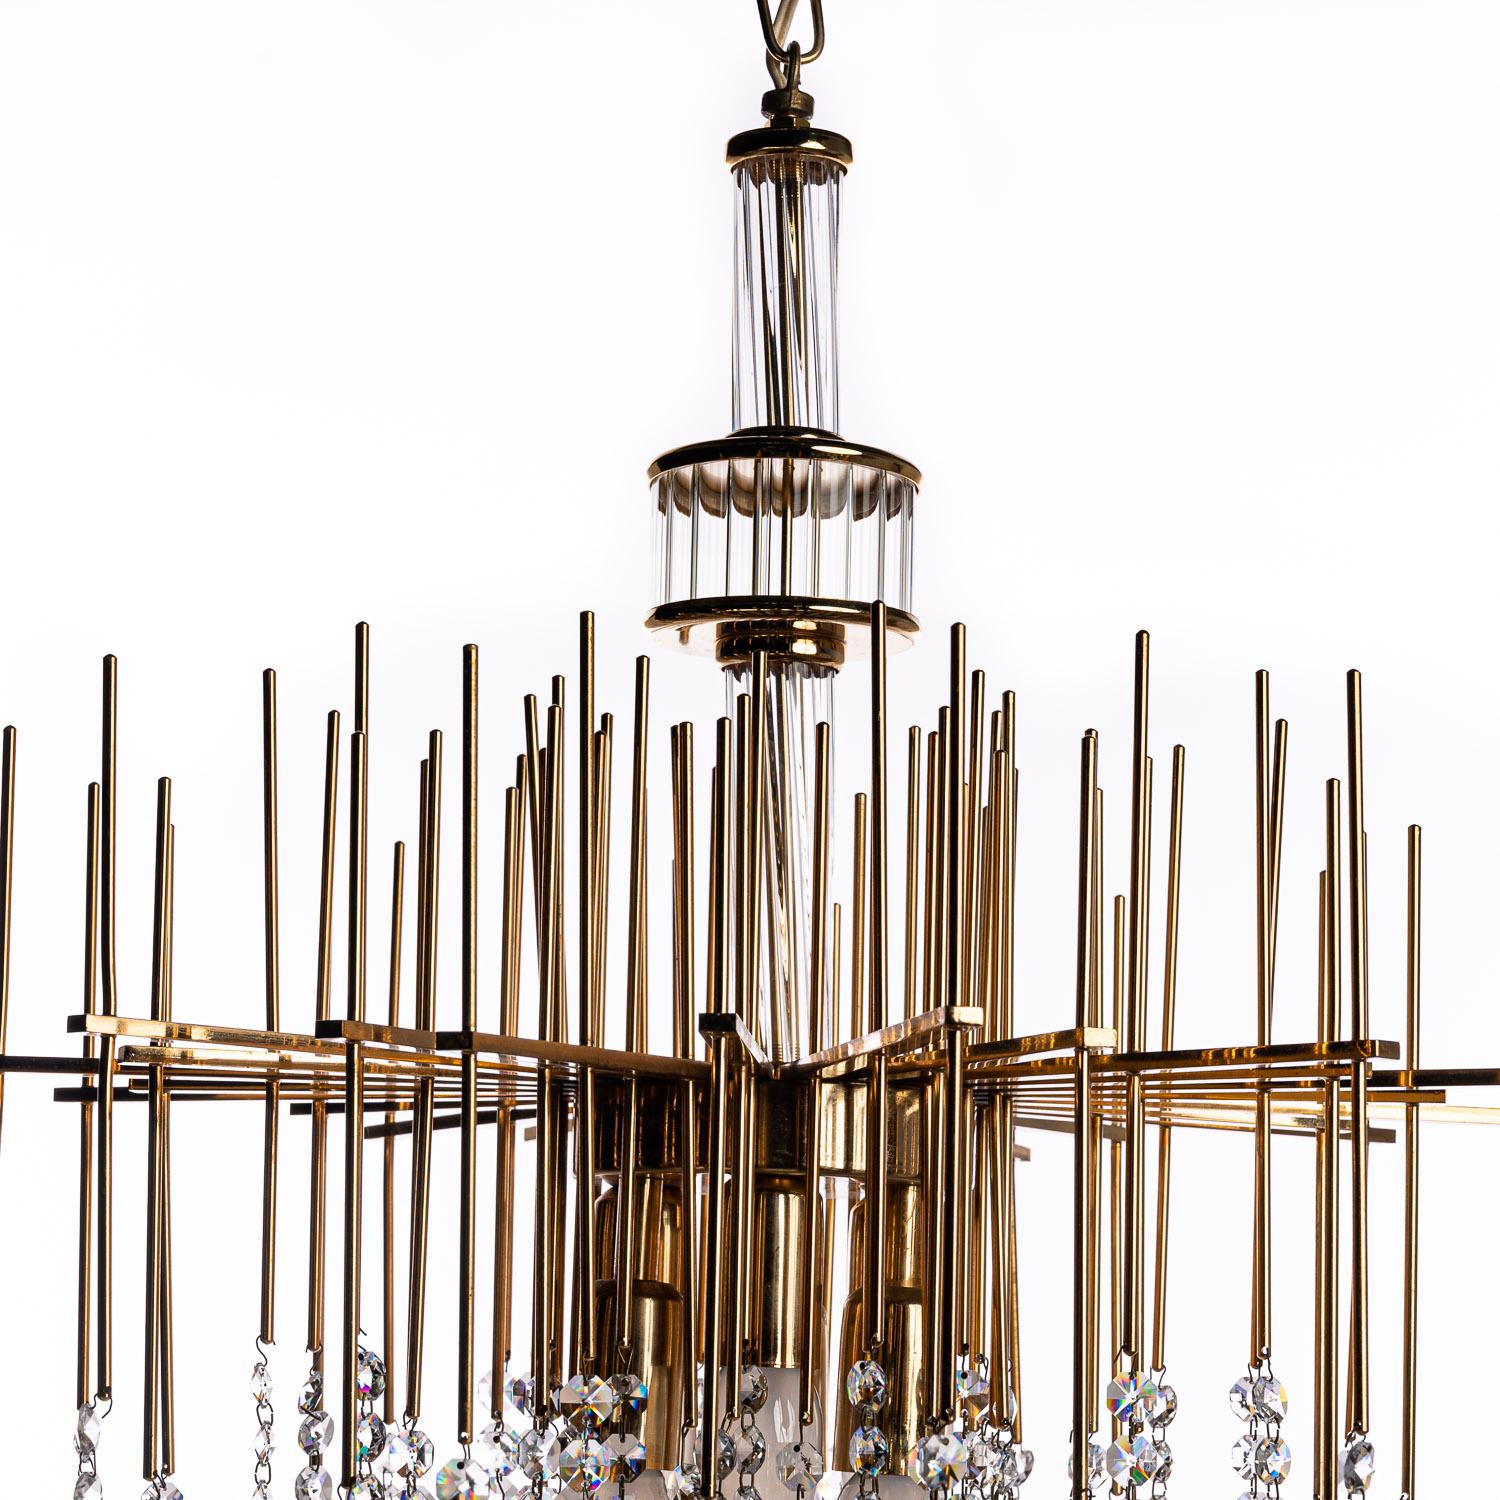 Welcome to this delightful 1950s chandelier, attributed to the designer Palwa. Straight rods radiate vertically and horizontally in a mesmerising form from the brass column, leading to short, light blue-tinted crystal drops to create a stunning